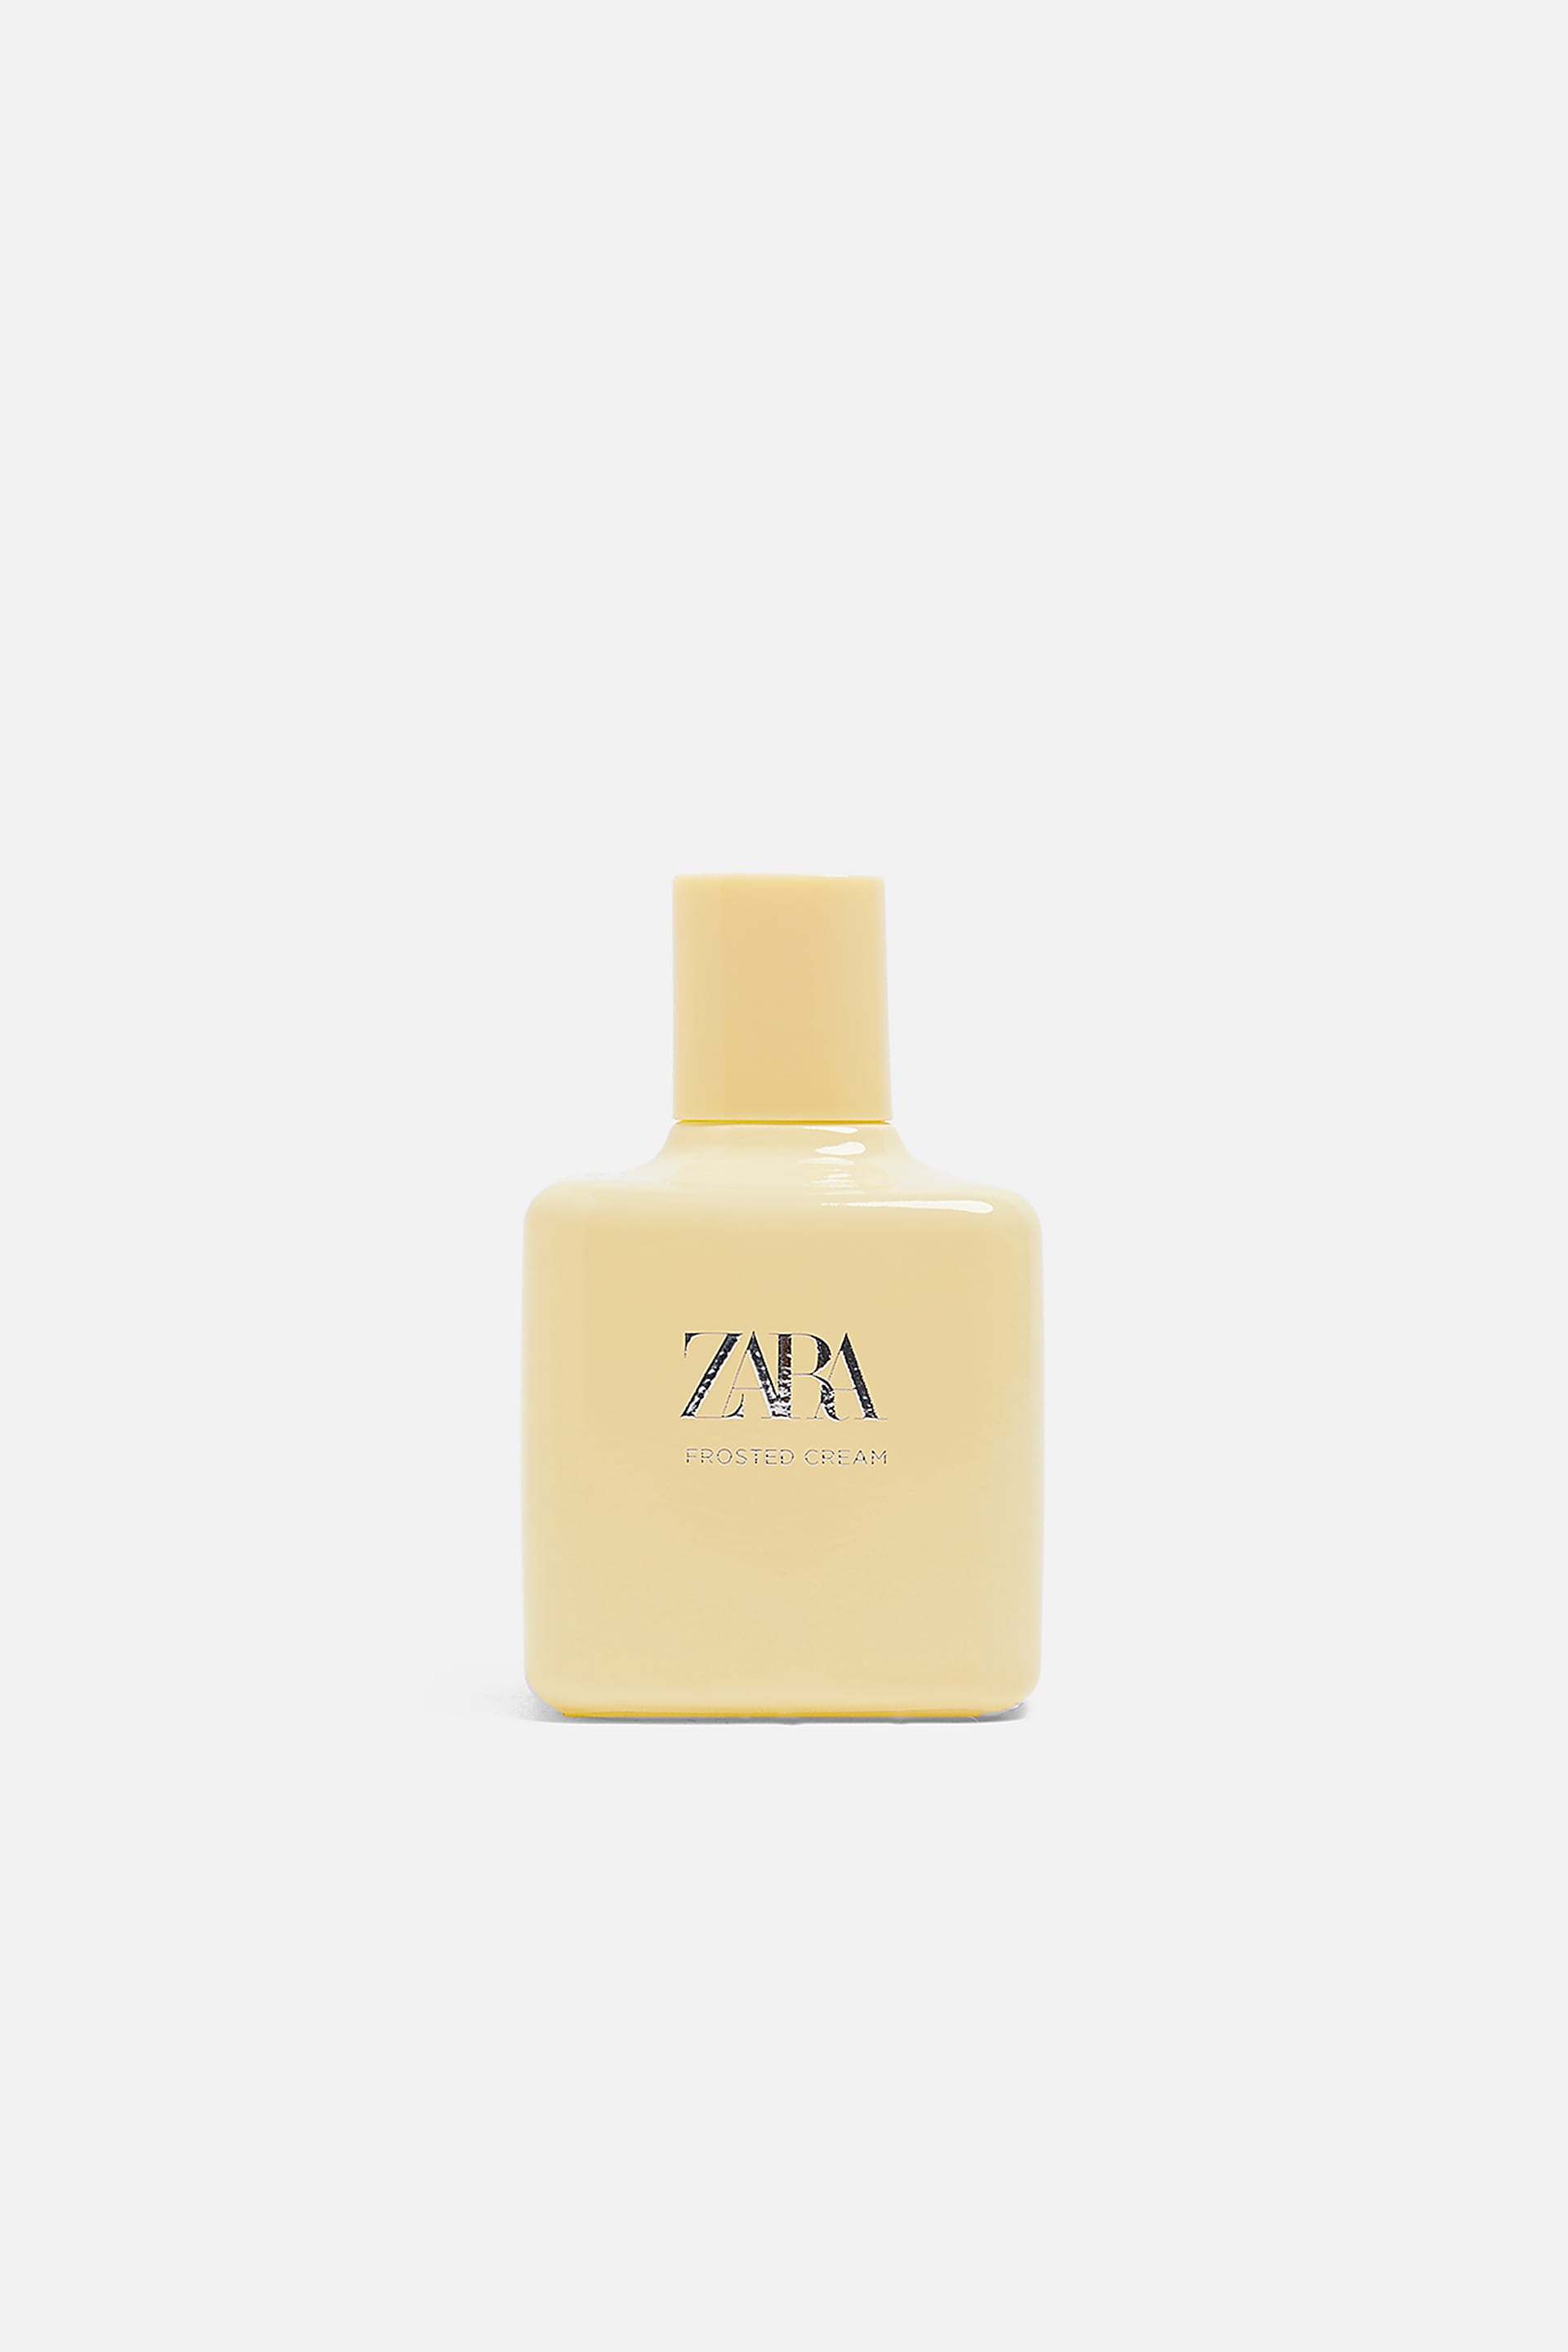 Frosted Cream 2019 Zara perfume - a new 